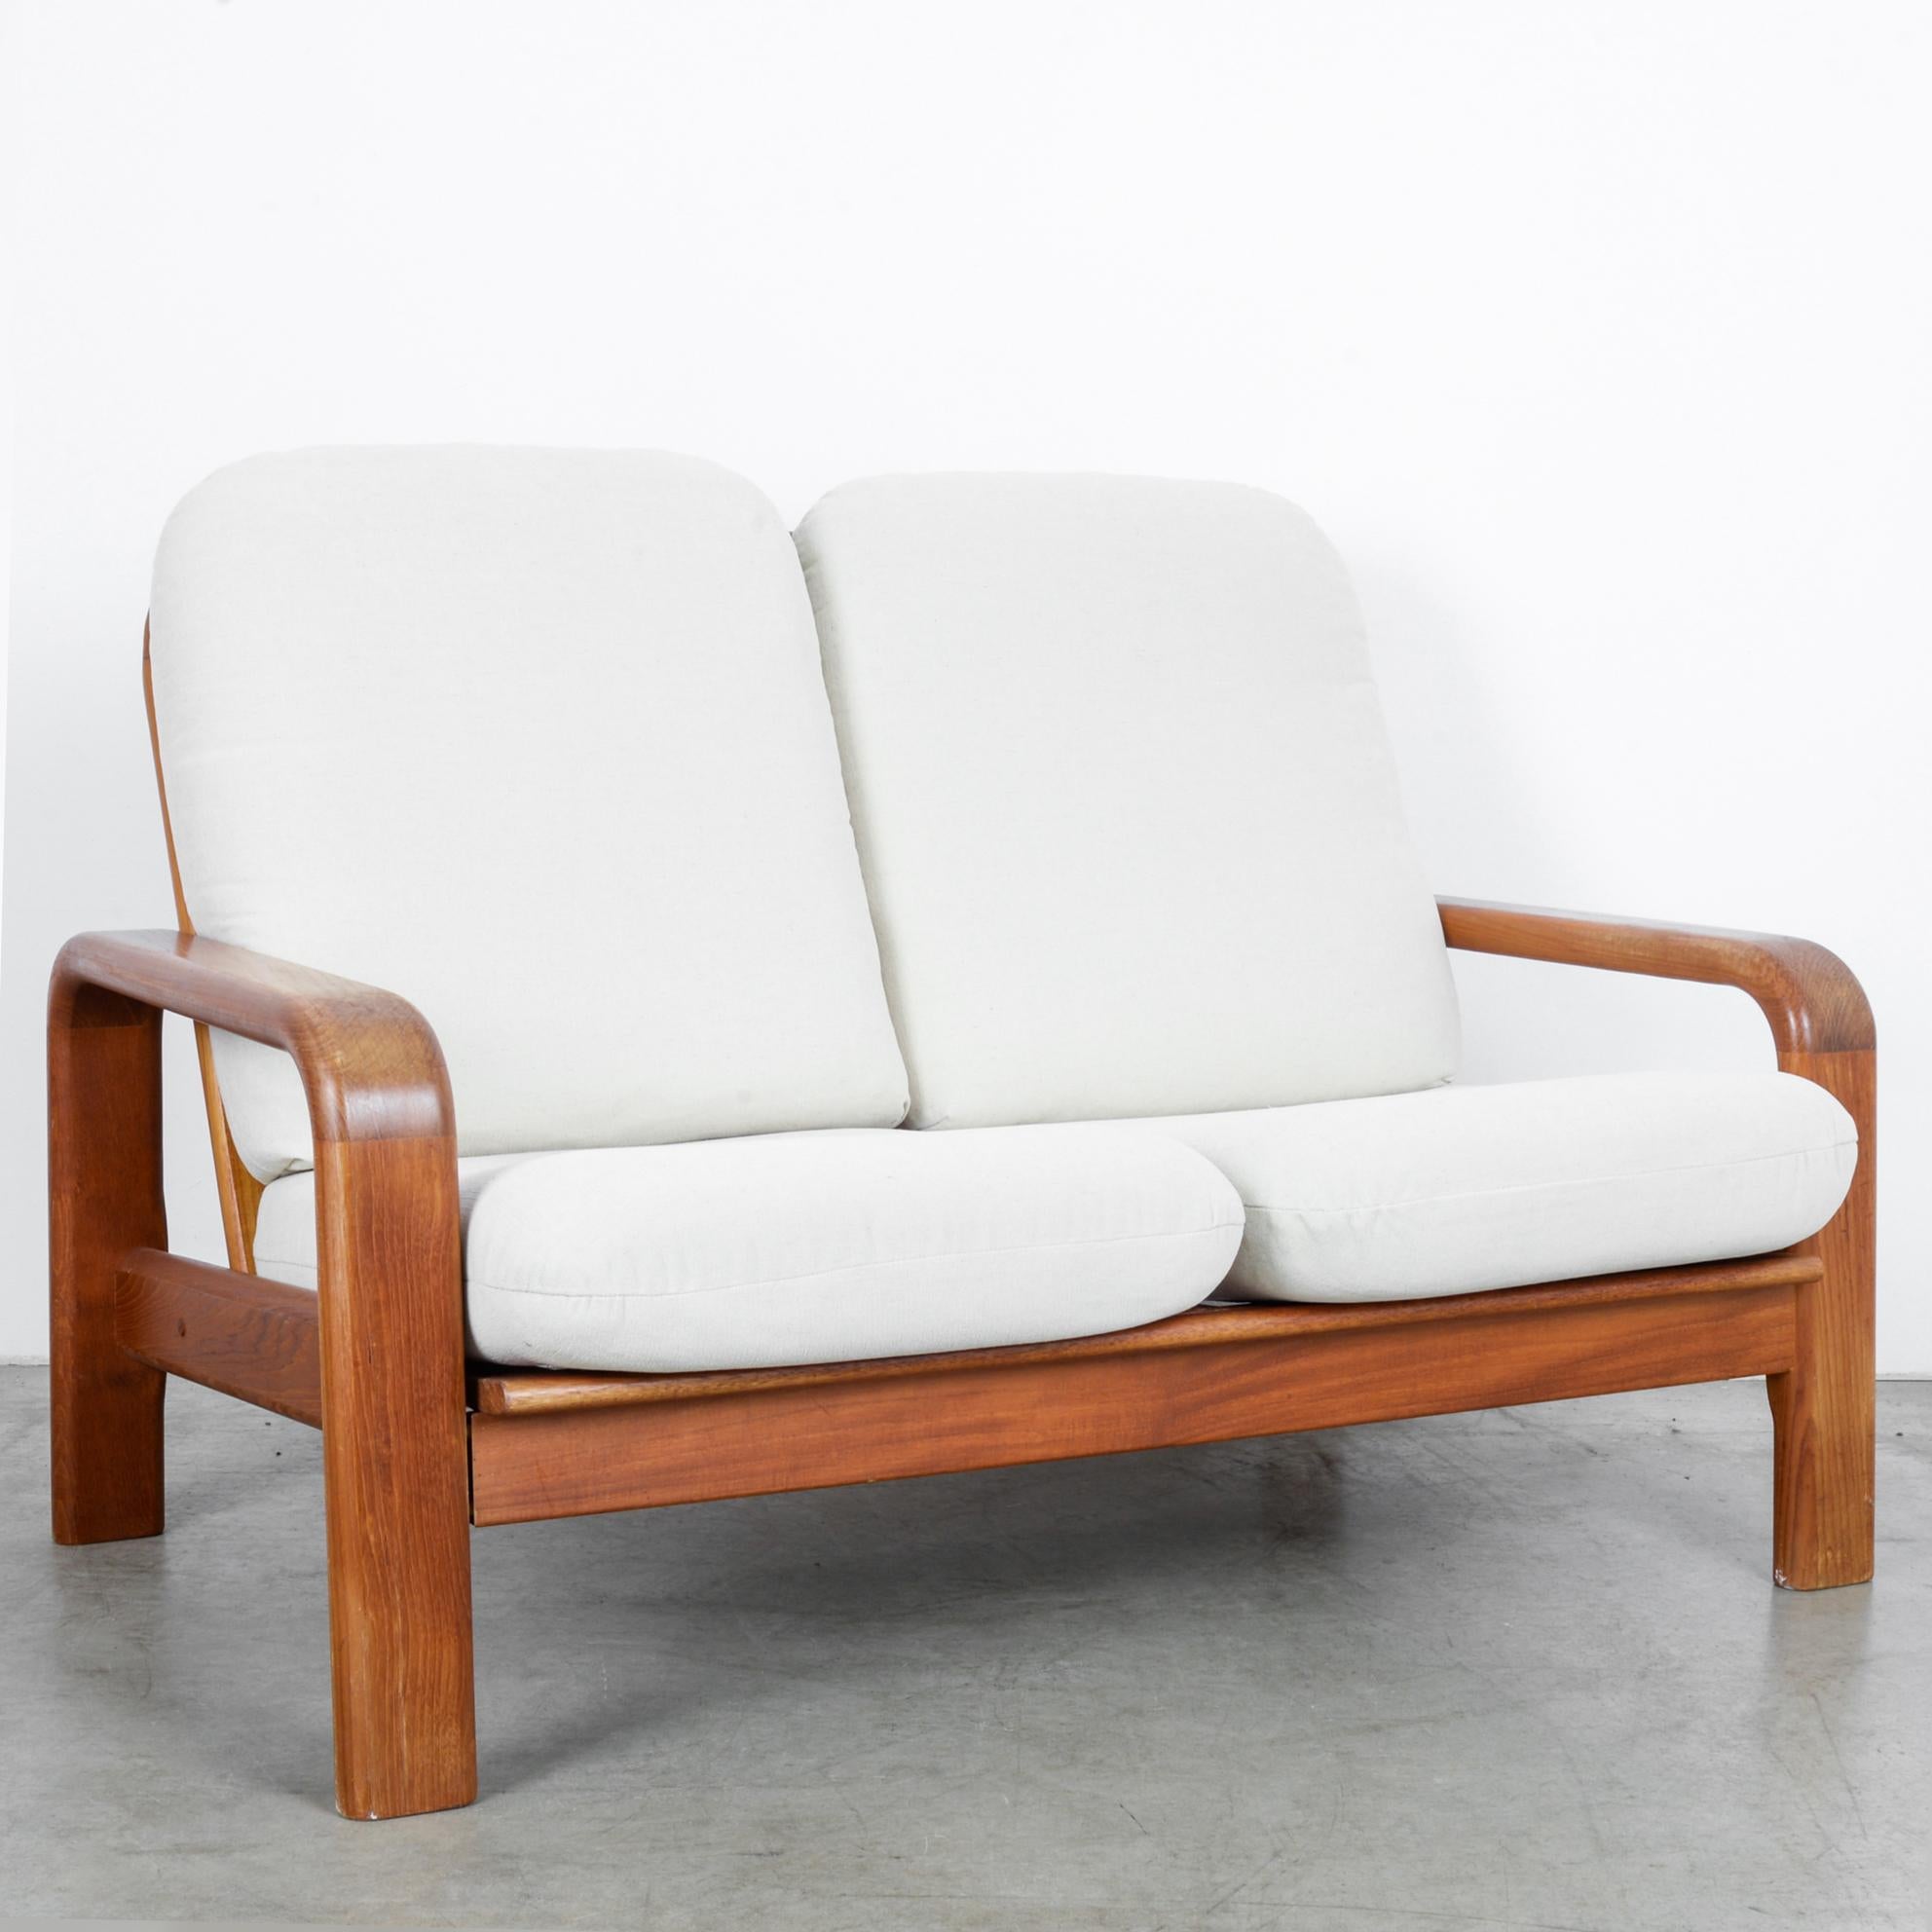 This two-seat sofa was made in Denmark, circa 1960. The ivory white upholstered seats and backrests provide comfort and enhance the warm tones of the polished wood. The armrests and backrests feature rounded edges, which form a pleasing contrast